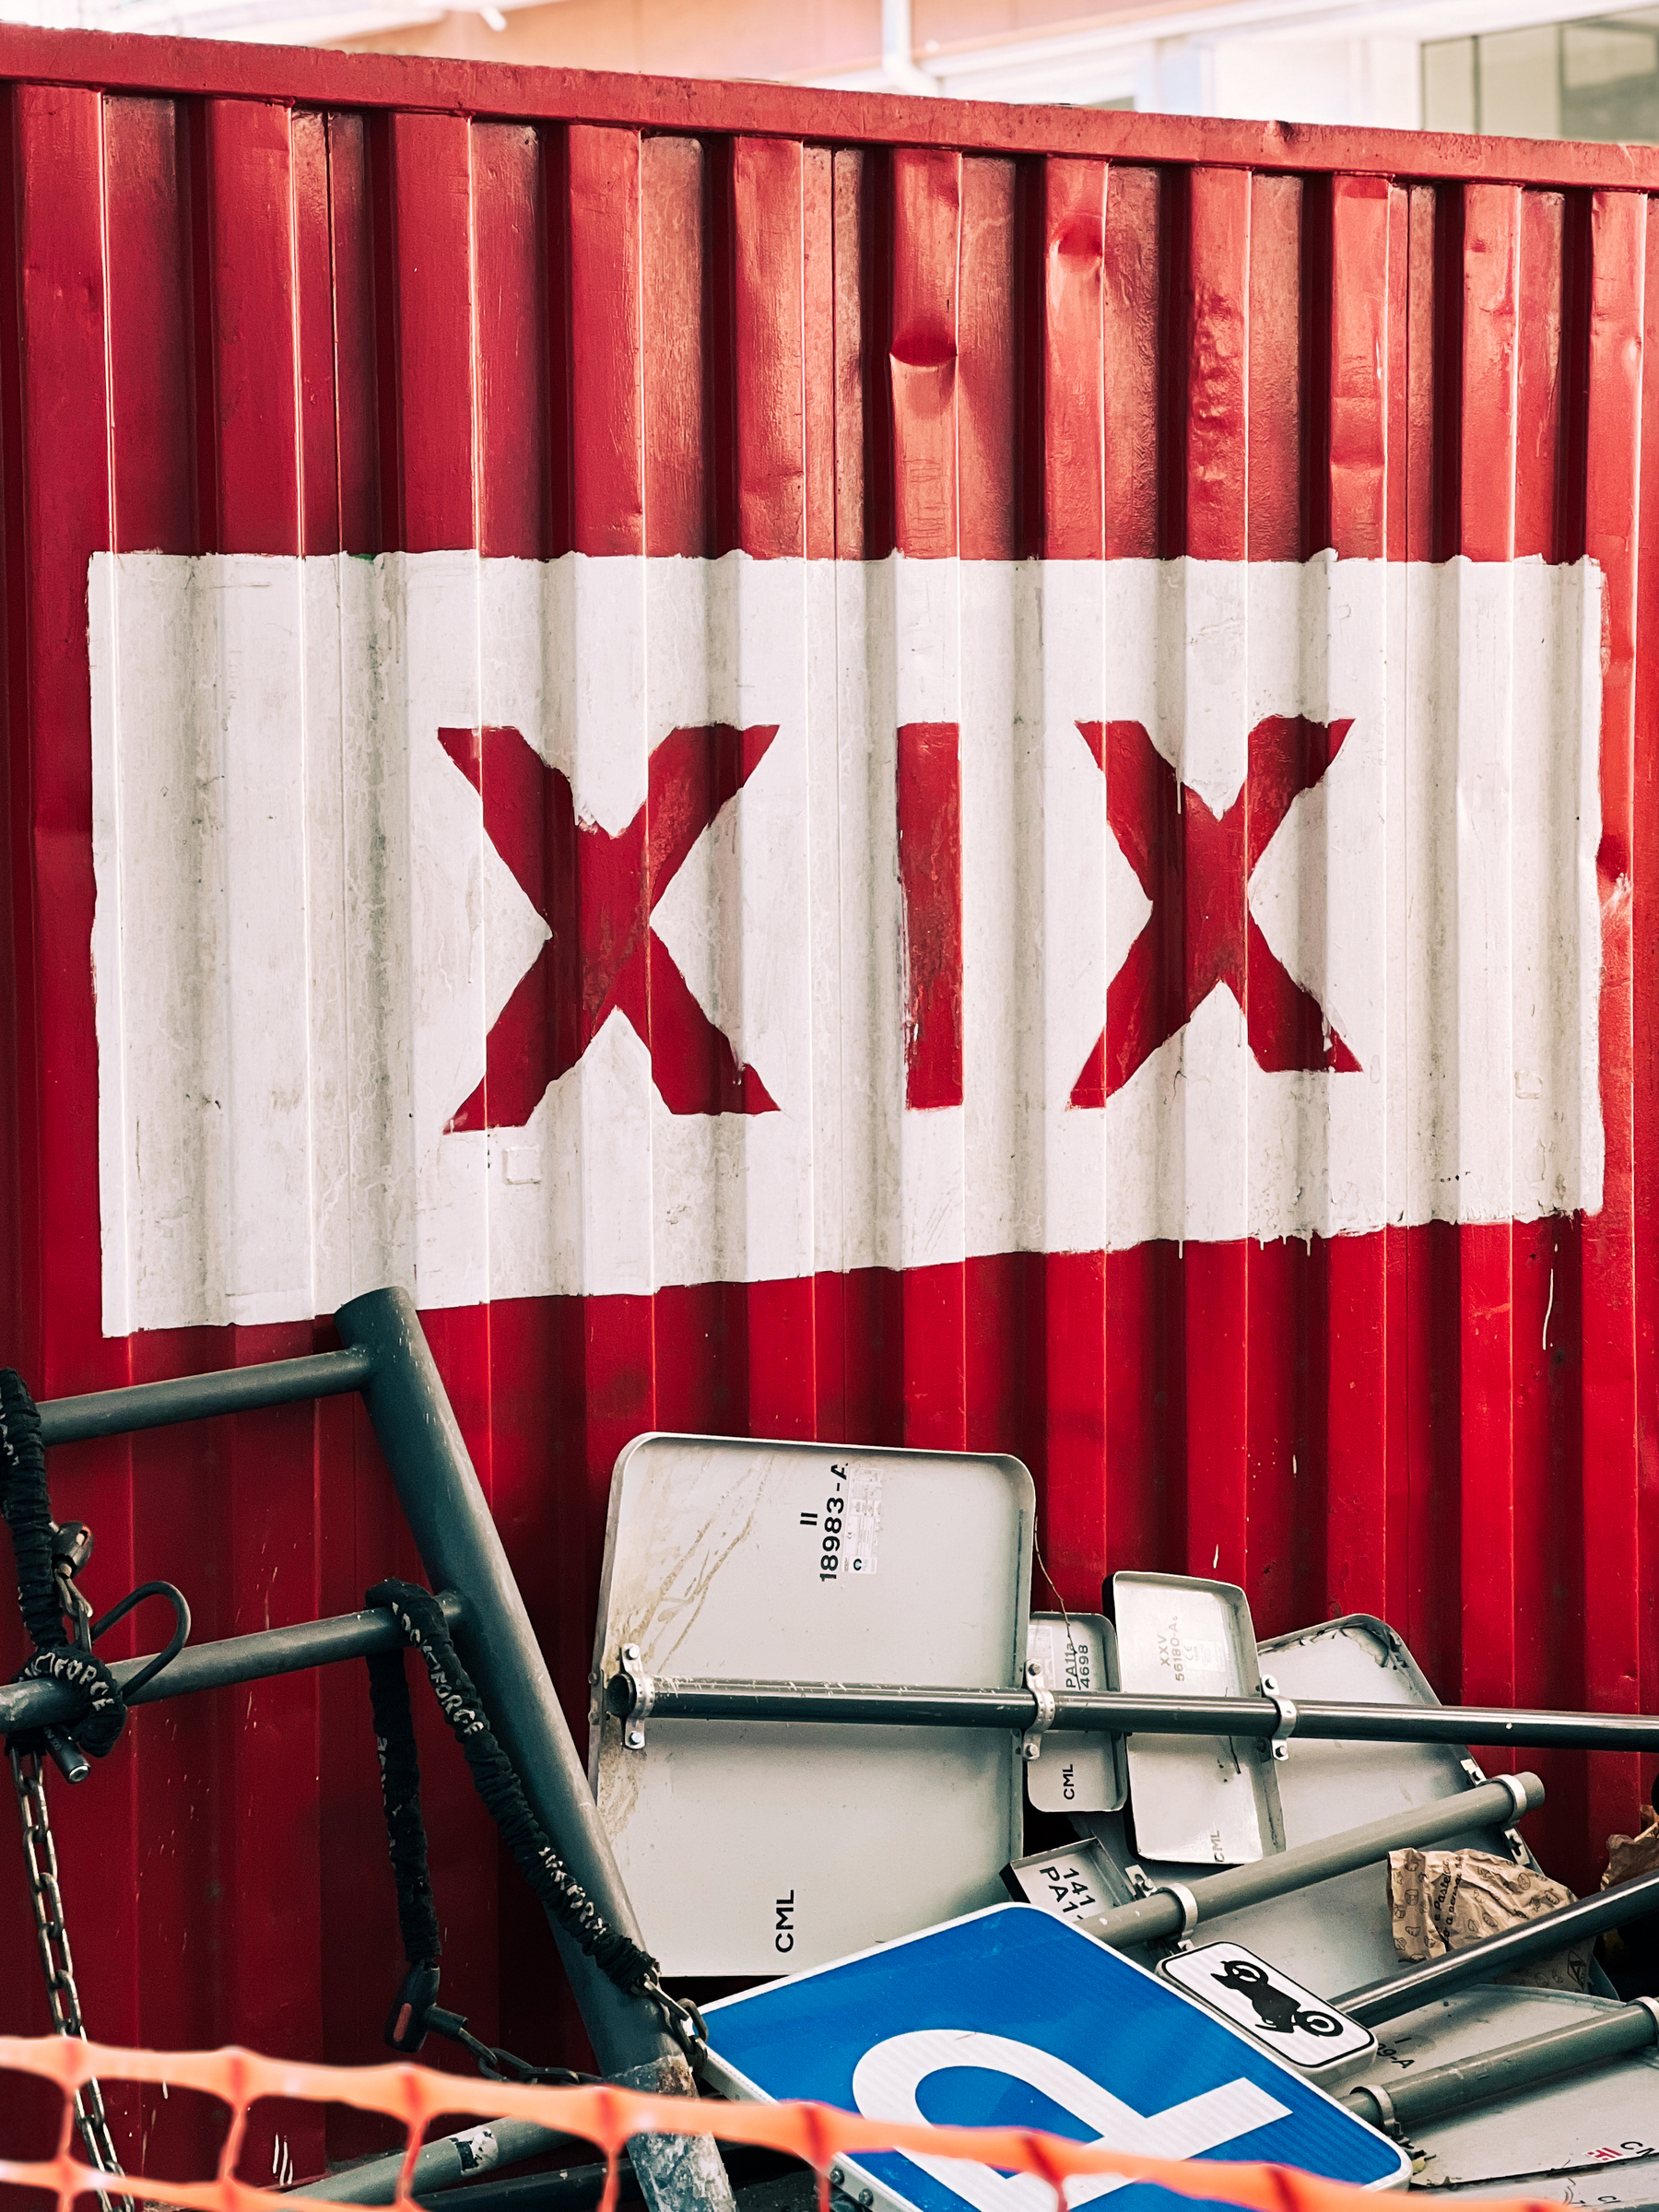 A red shipping container with “XIX” on the side, and some construction material buildup next to it.